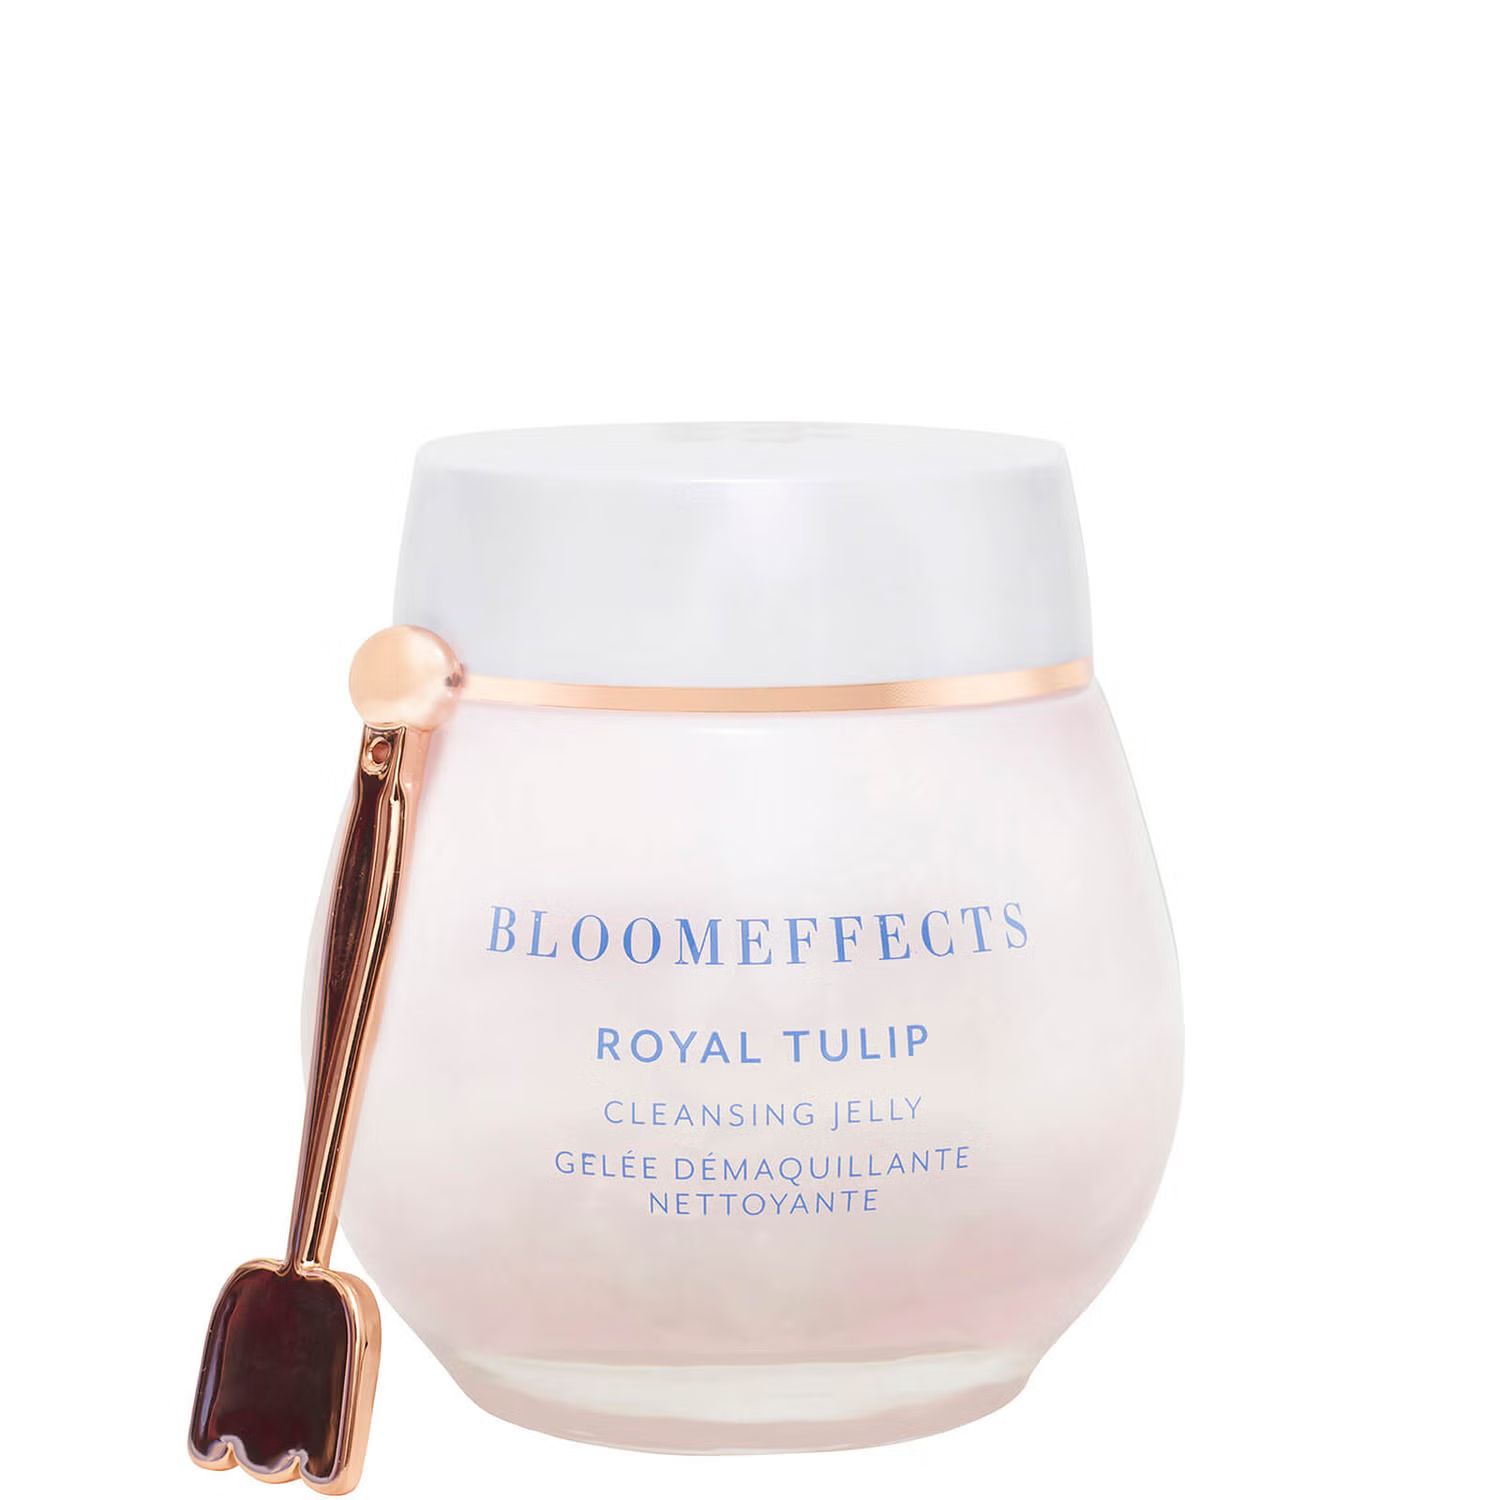 Bloomeffects Royal Tulip Cleansing Jelly 80ml | Skinstore